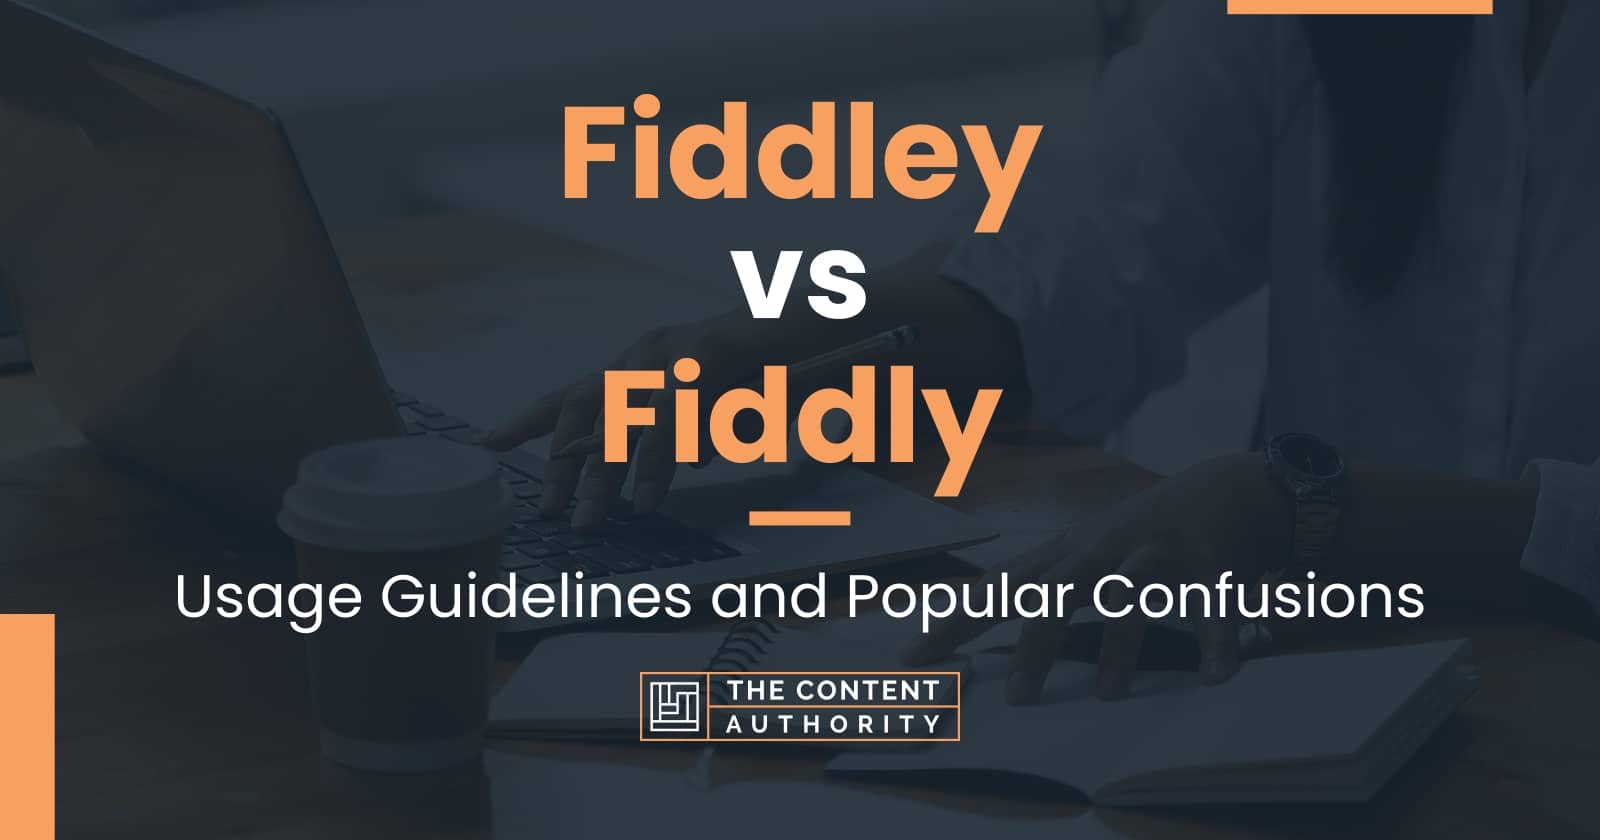 Fiddley vs Fiddly: Usage Guidelines and Popular Confusions